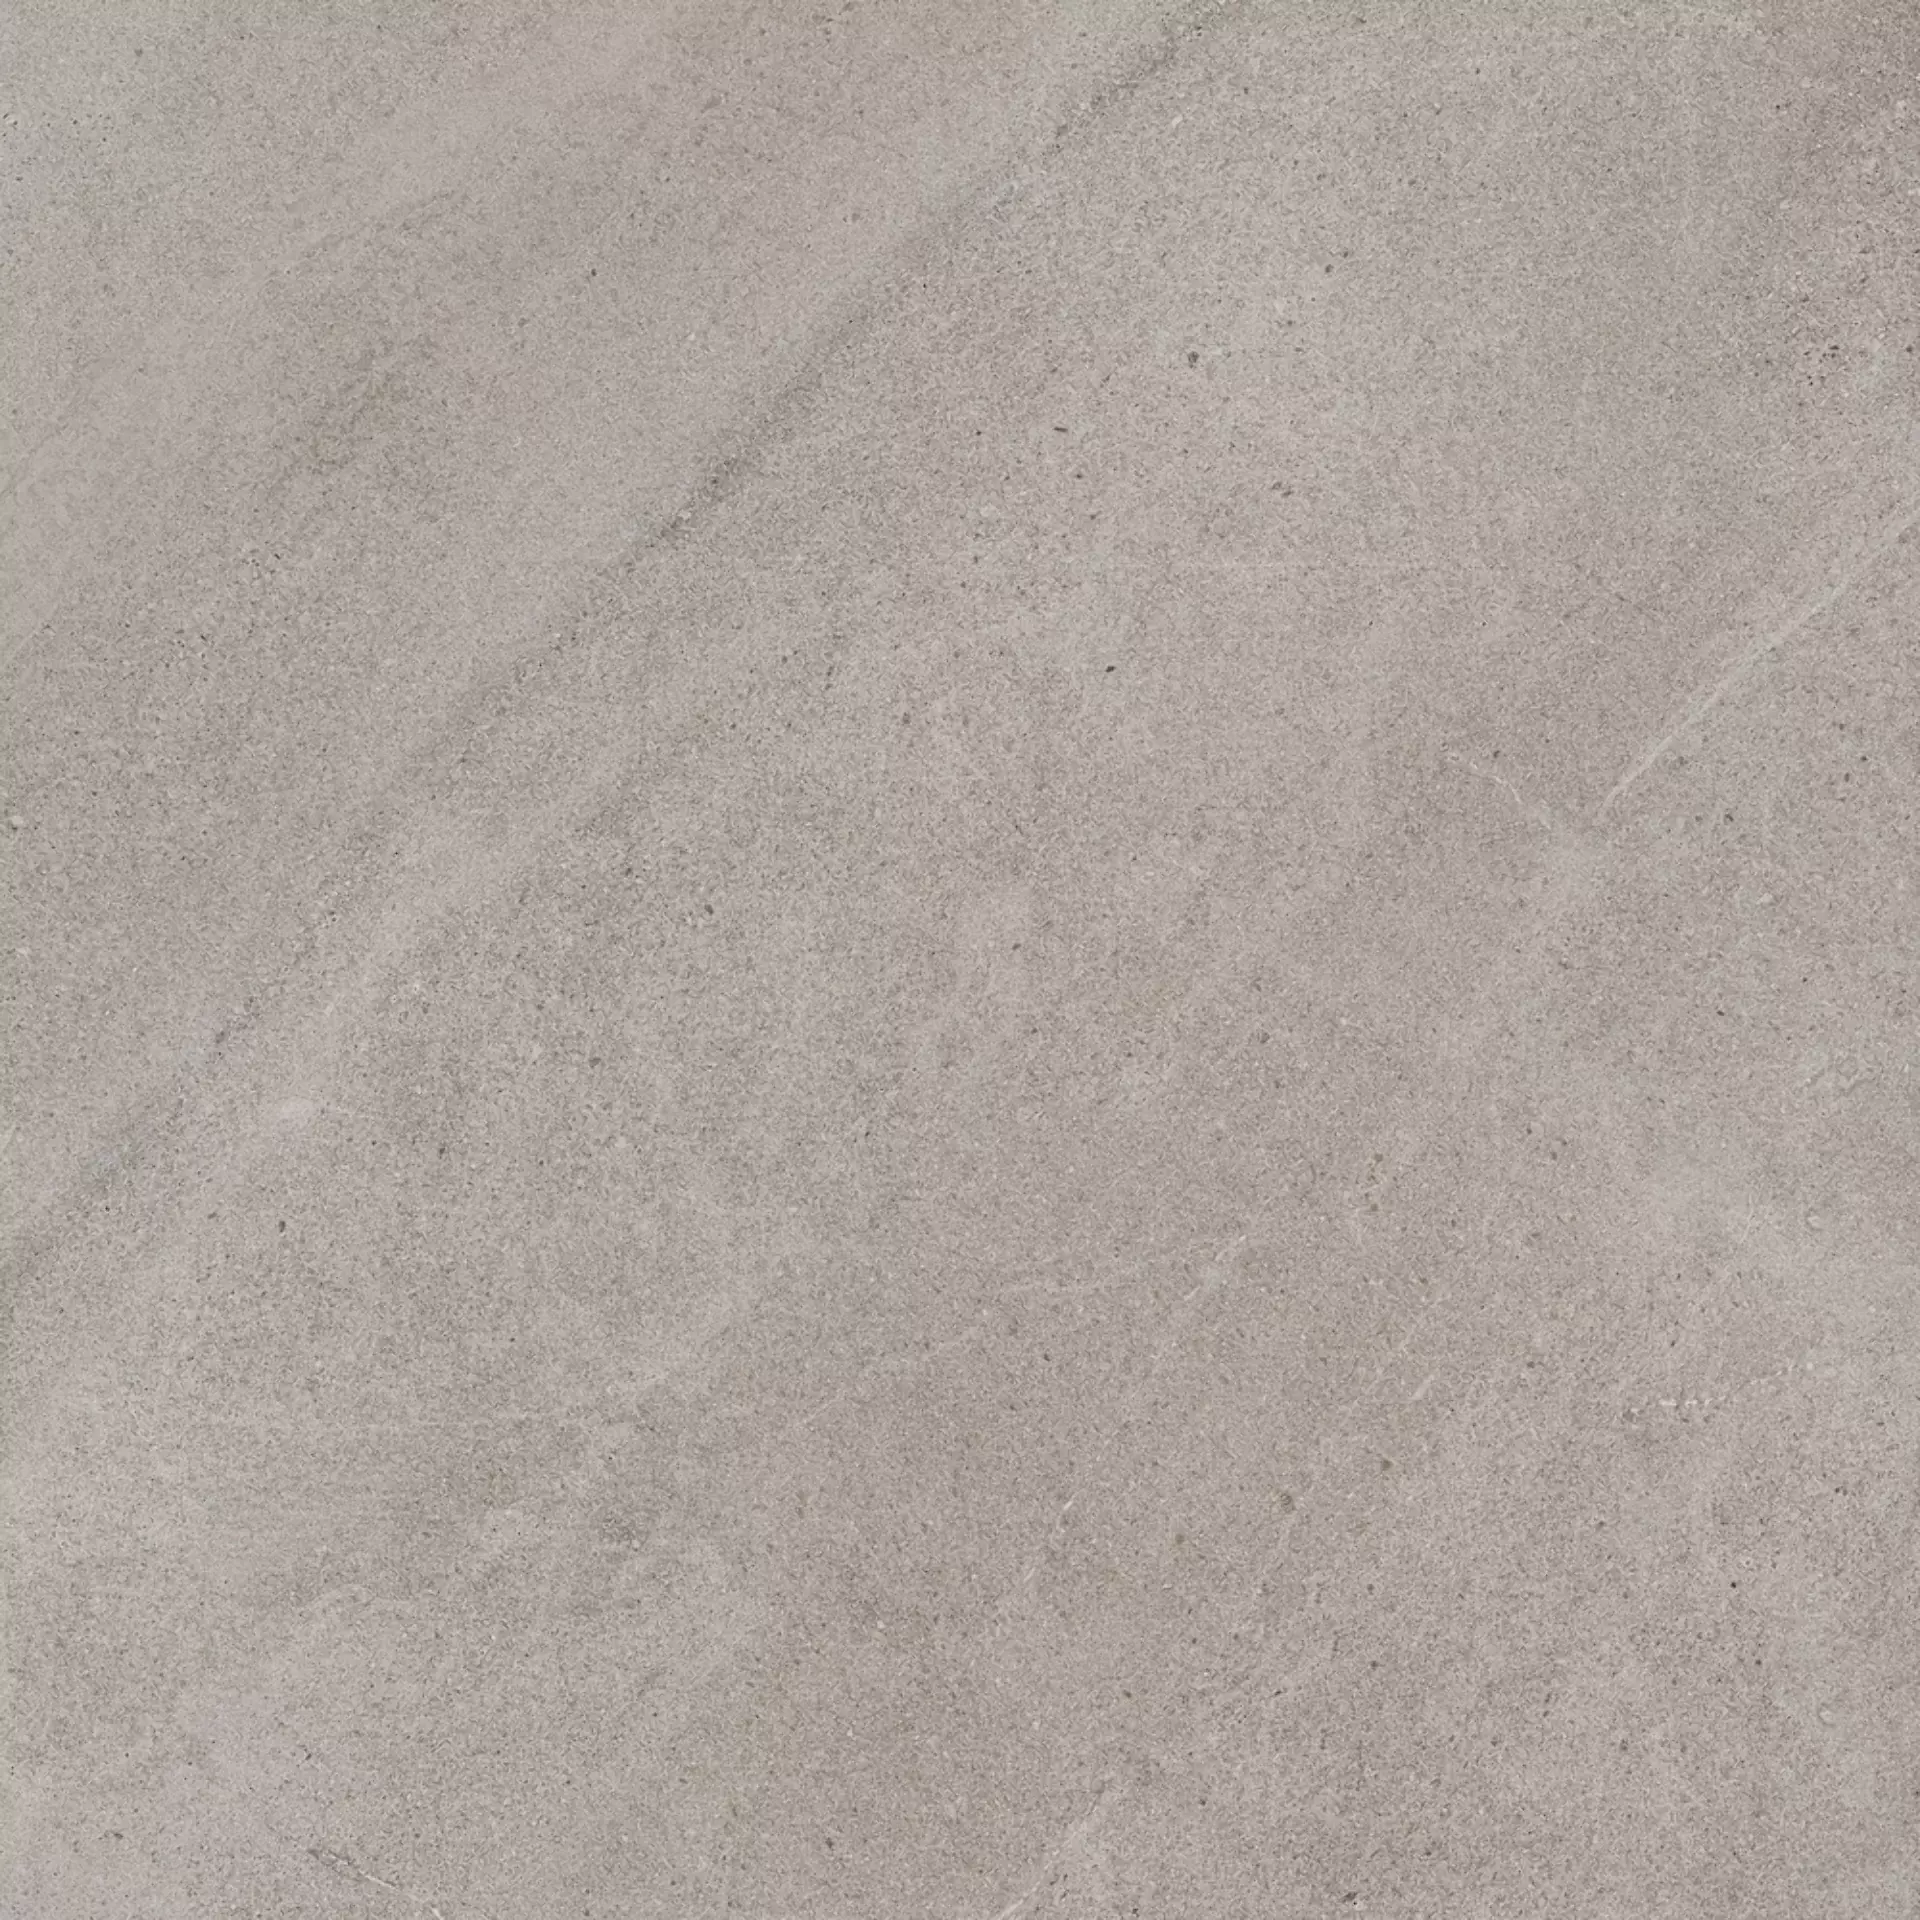 Cottodeste Limestone Oyster Naturale Protect EGGLS20 90x90cm rectified 14mm